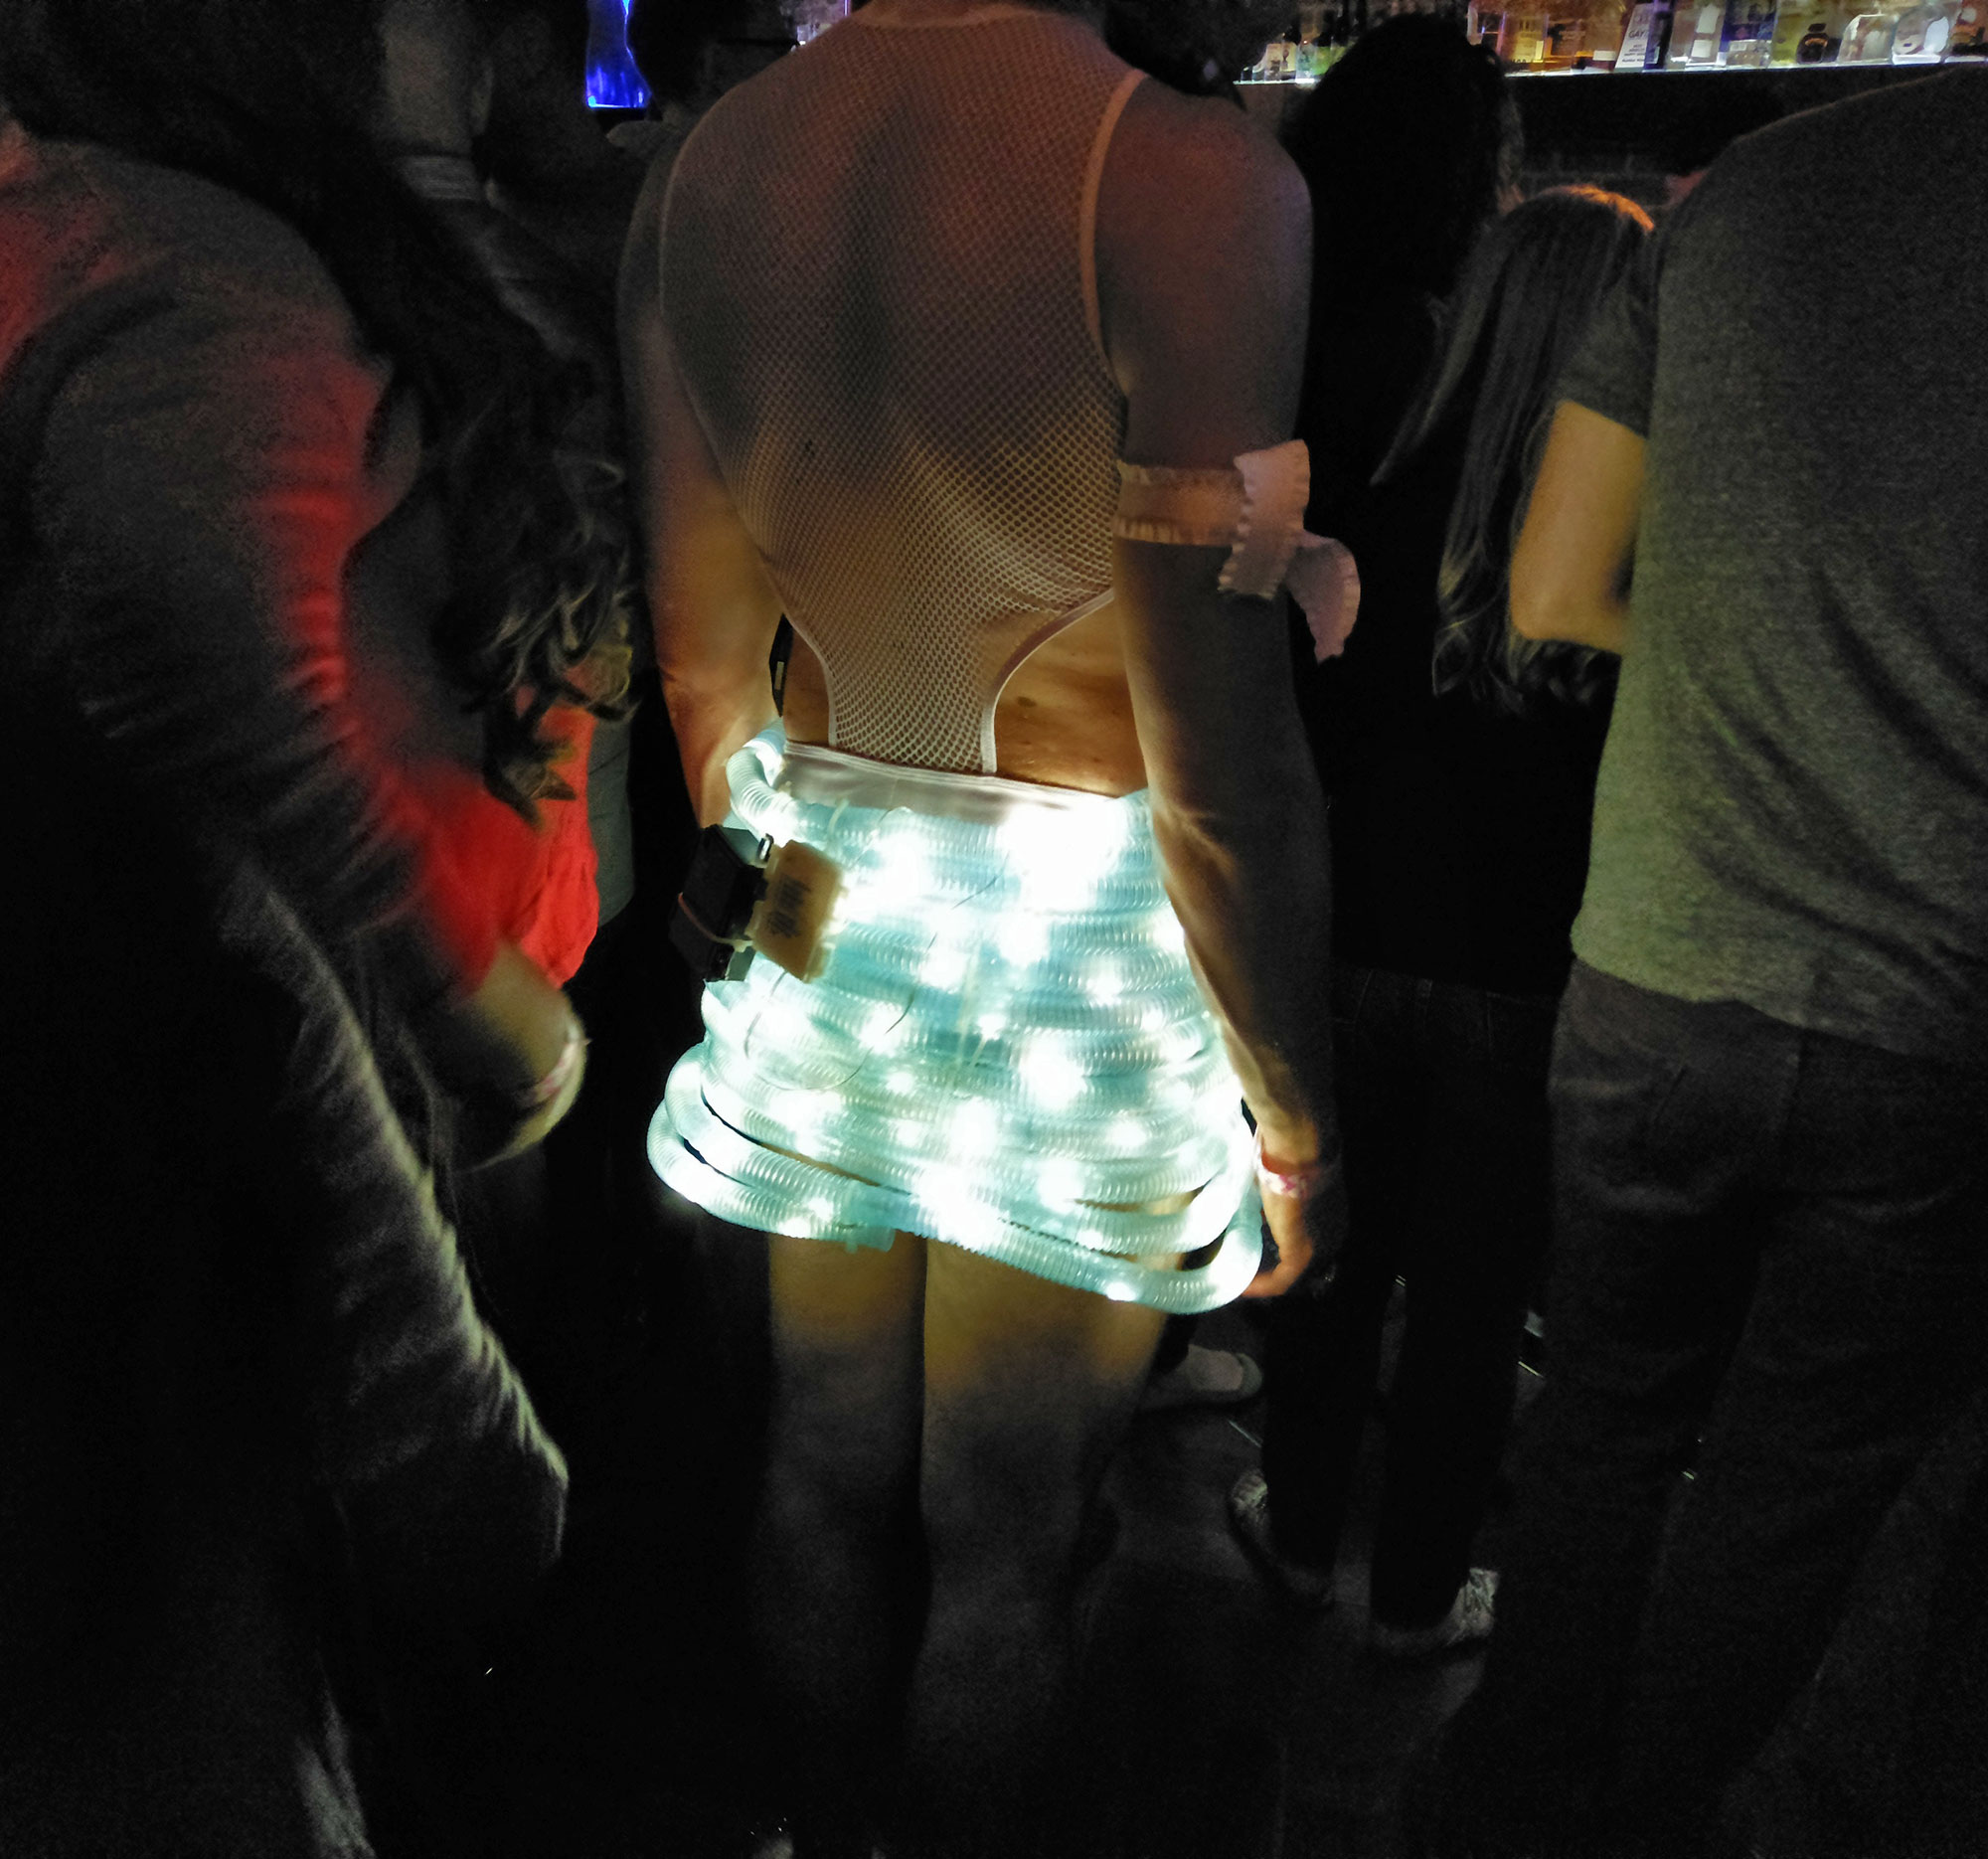 A Washington High Heel Race contestant at Number Nine nightclub after the race (with light-up shirt).